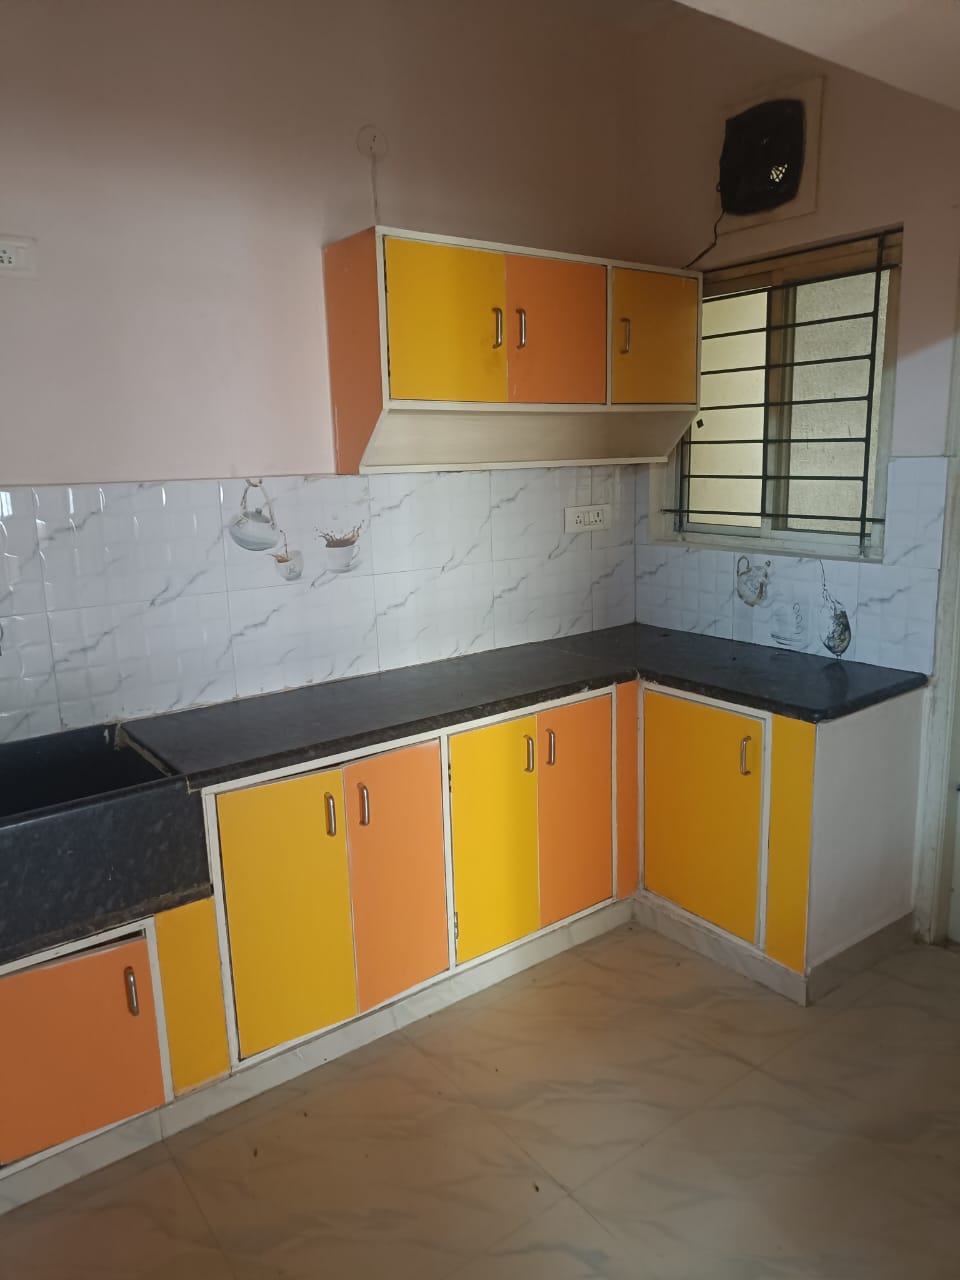 2 BHK Independent House for Lease Only at JAML2 - 2375 in Kamakshipalya